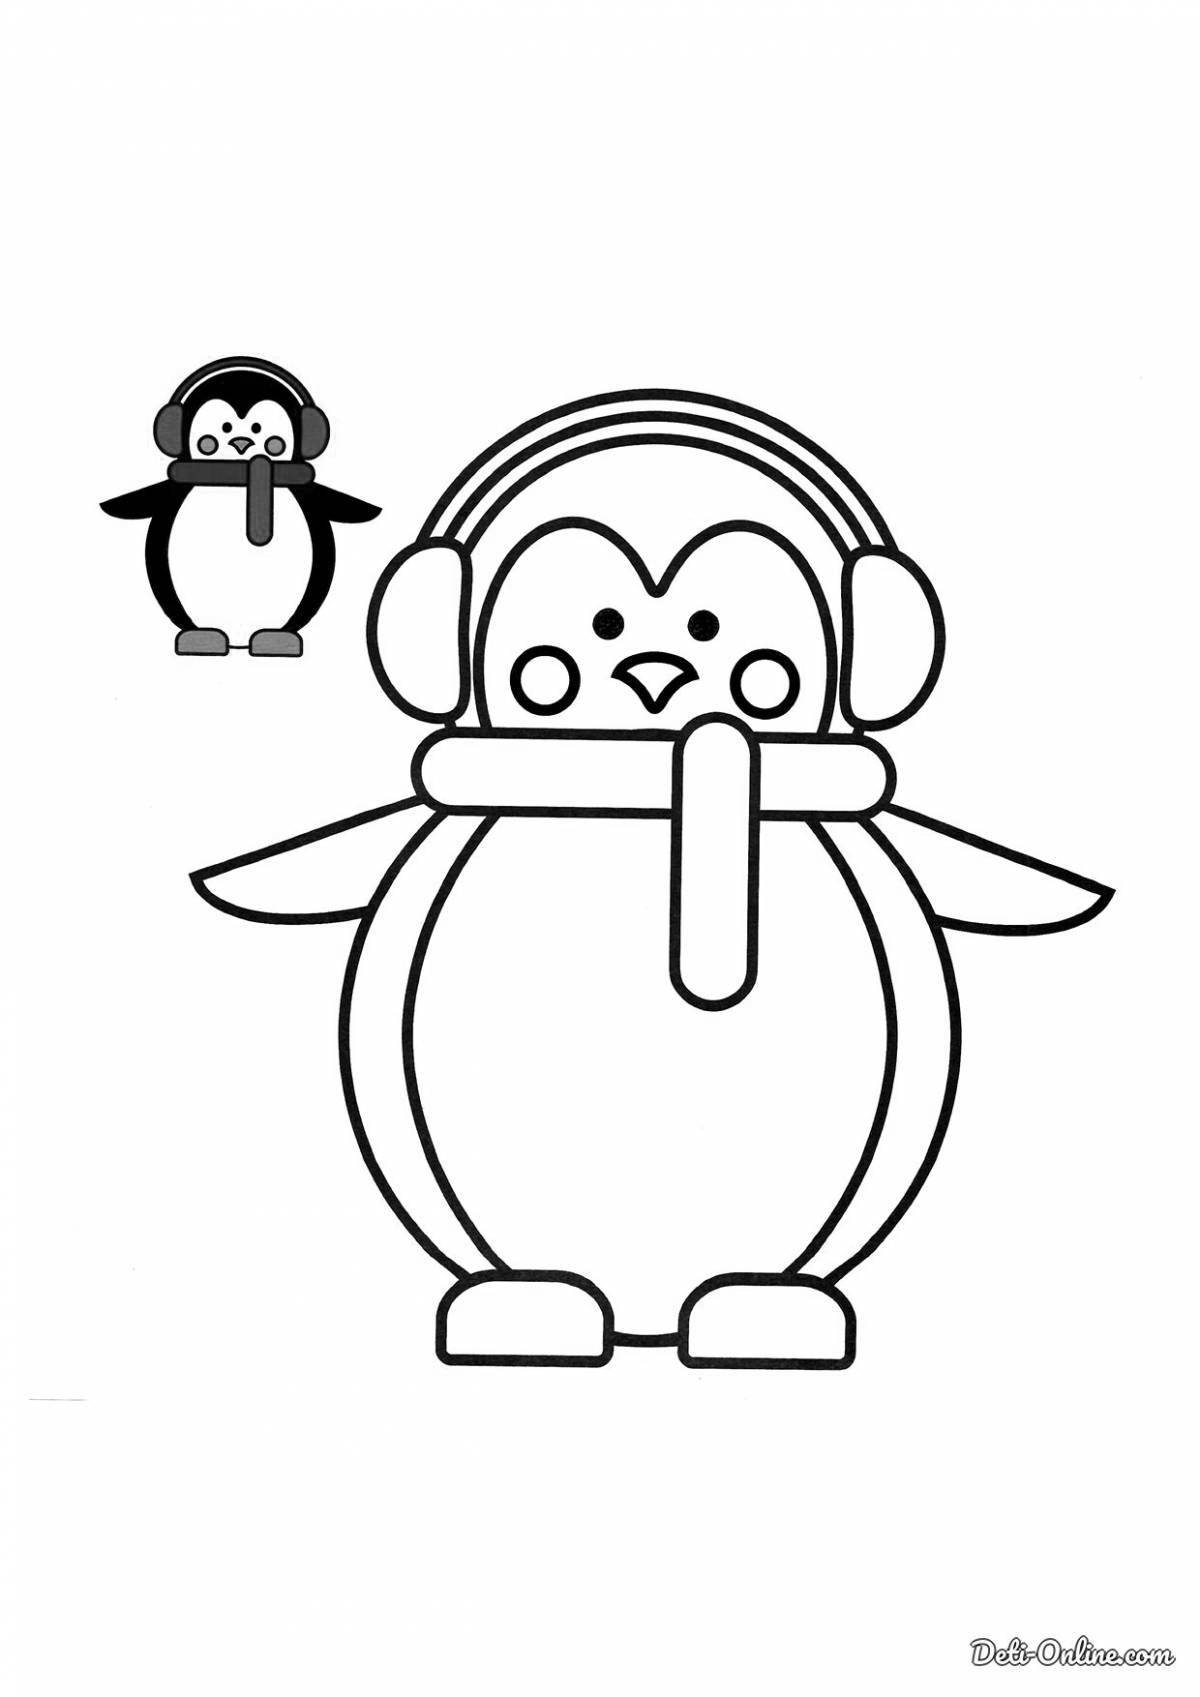 Penguin holiday coloring book